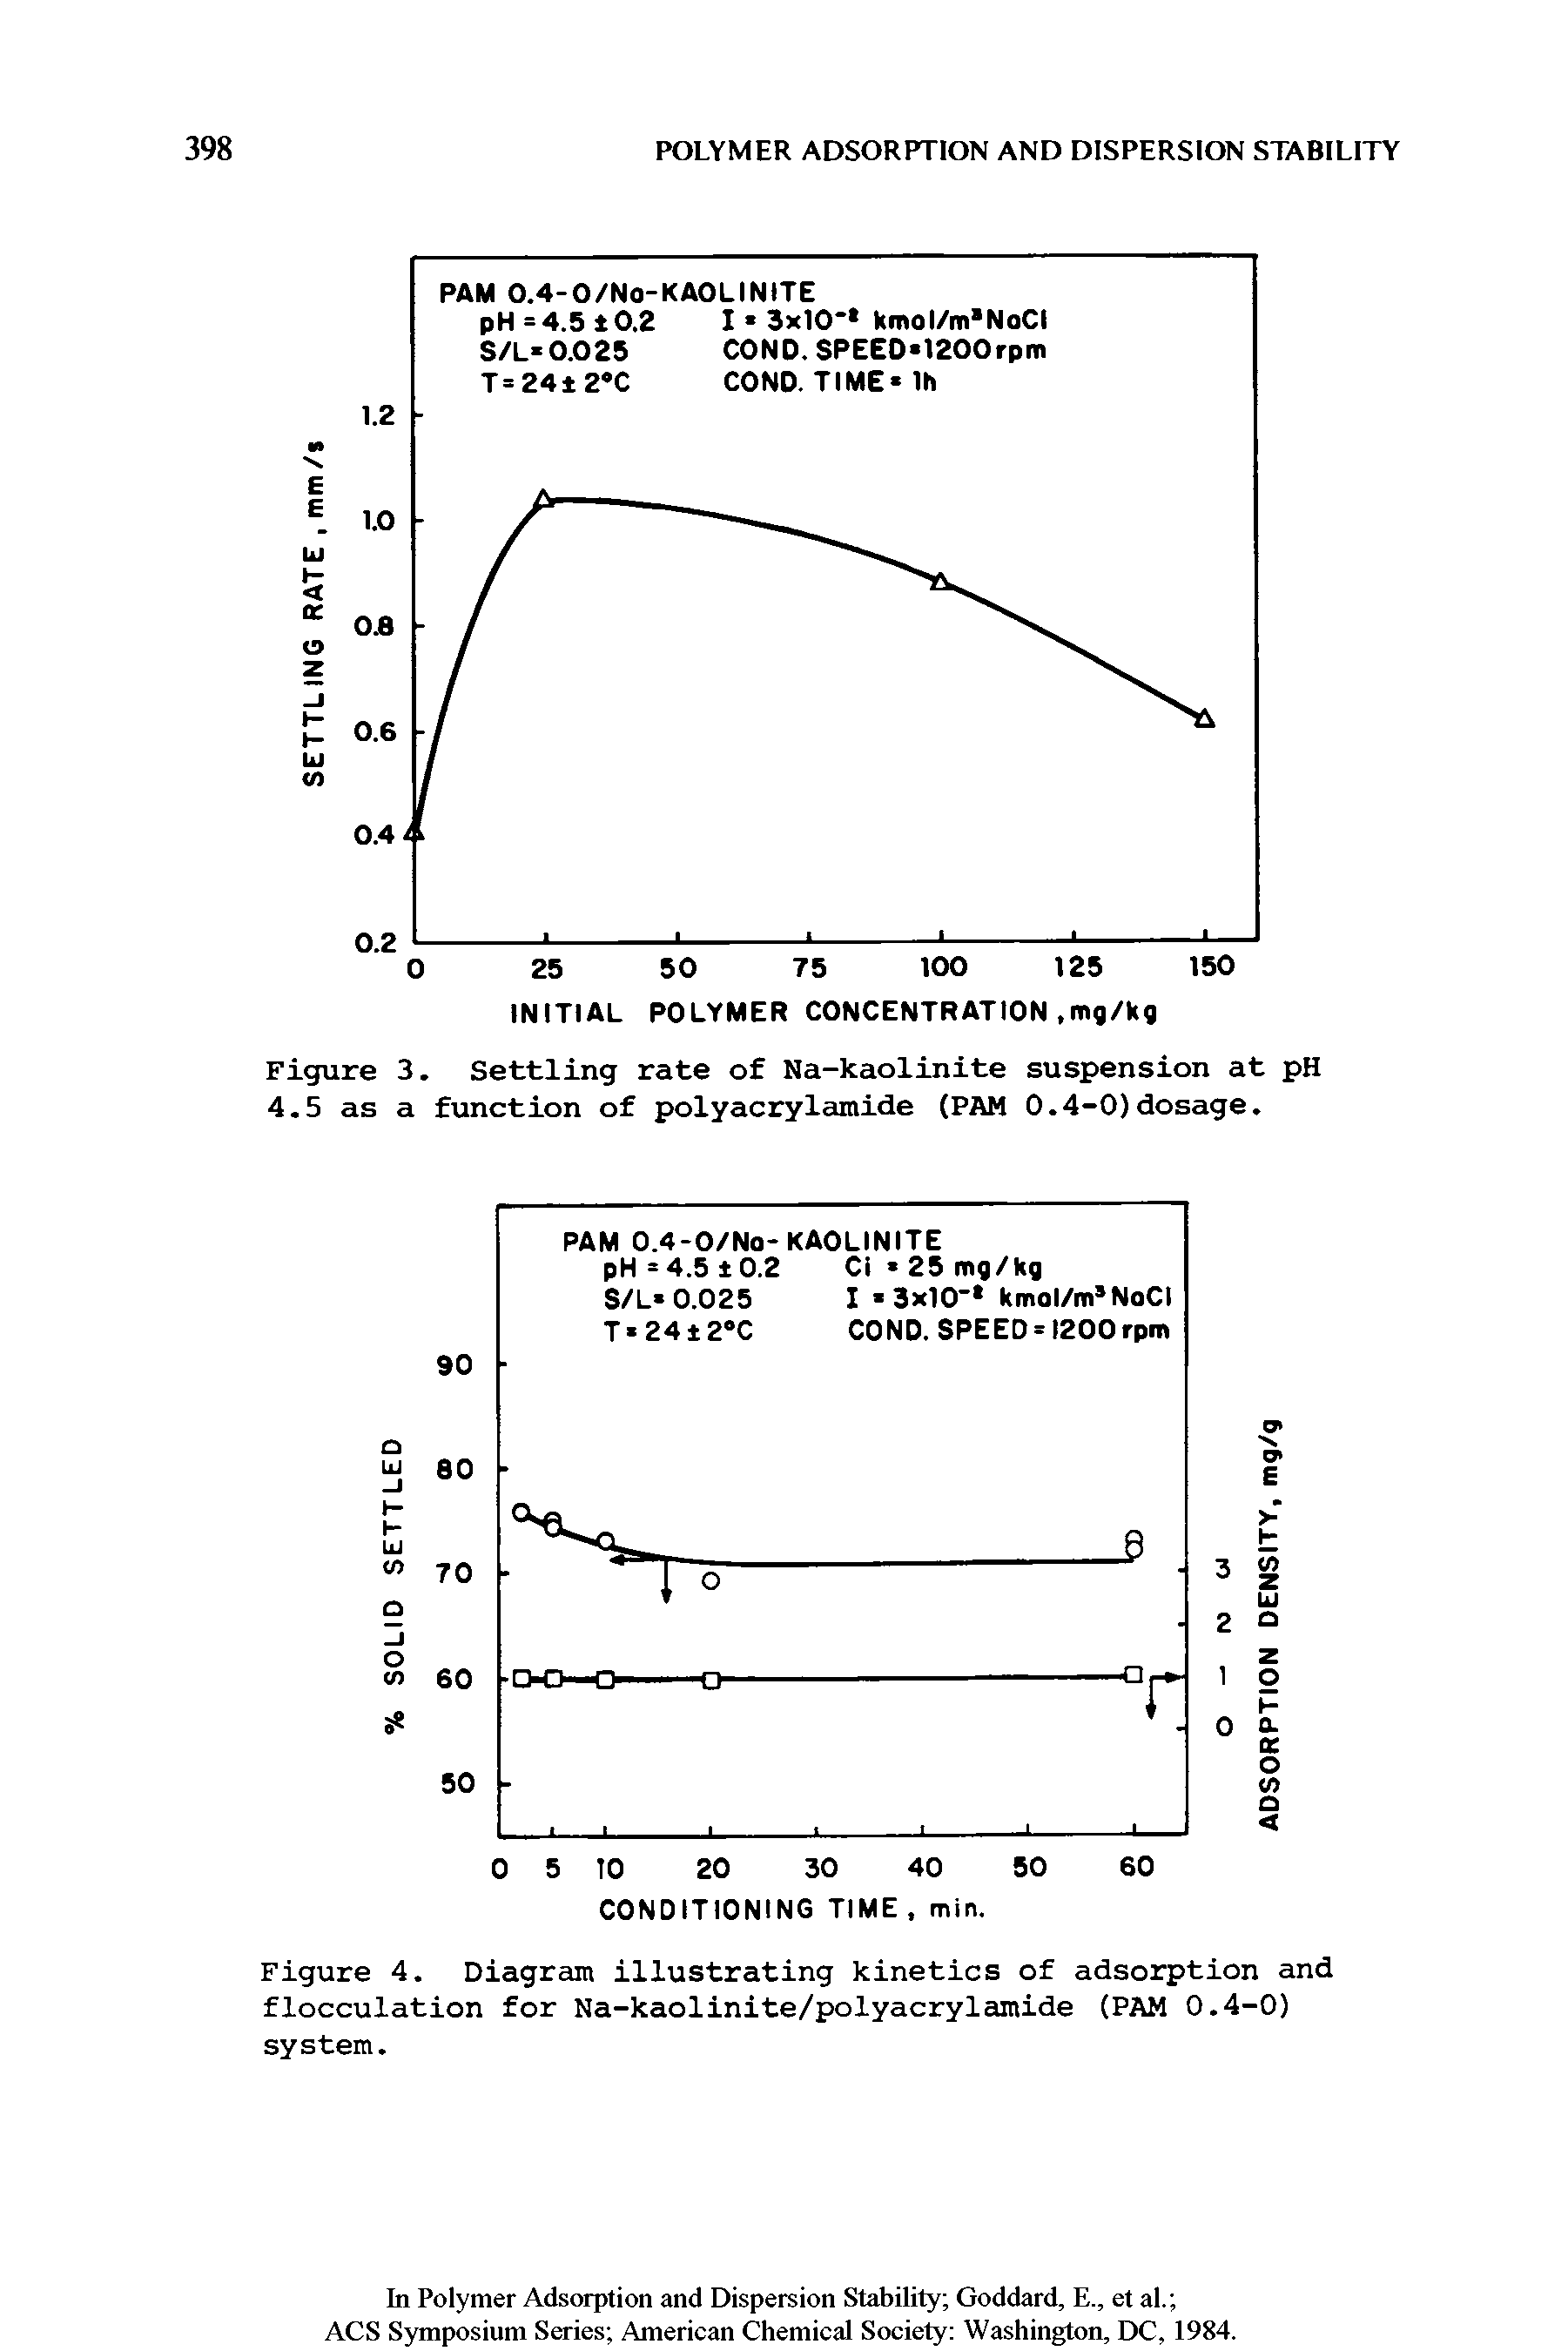 Figure 4. Diagram illustrating kinetics of adsorption and flocculation for Na-kaolinite/polyacrylamide (PAM 0.4-0) system.